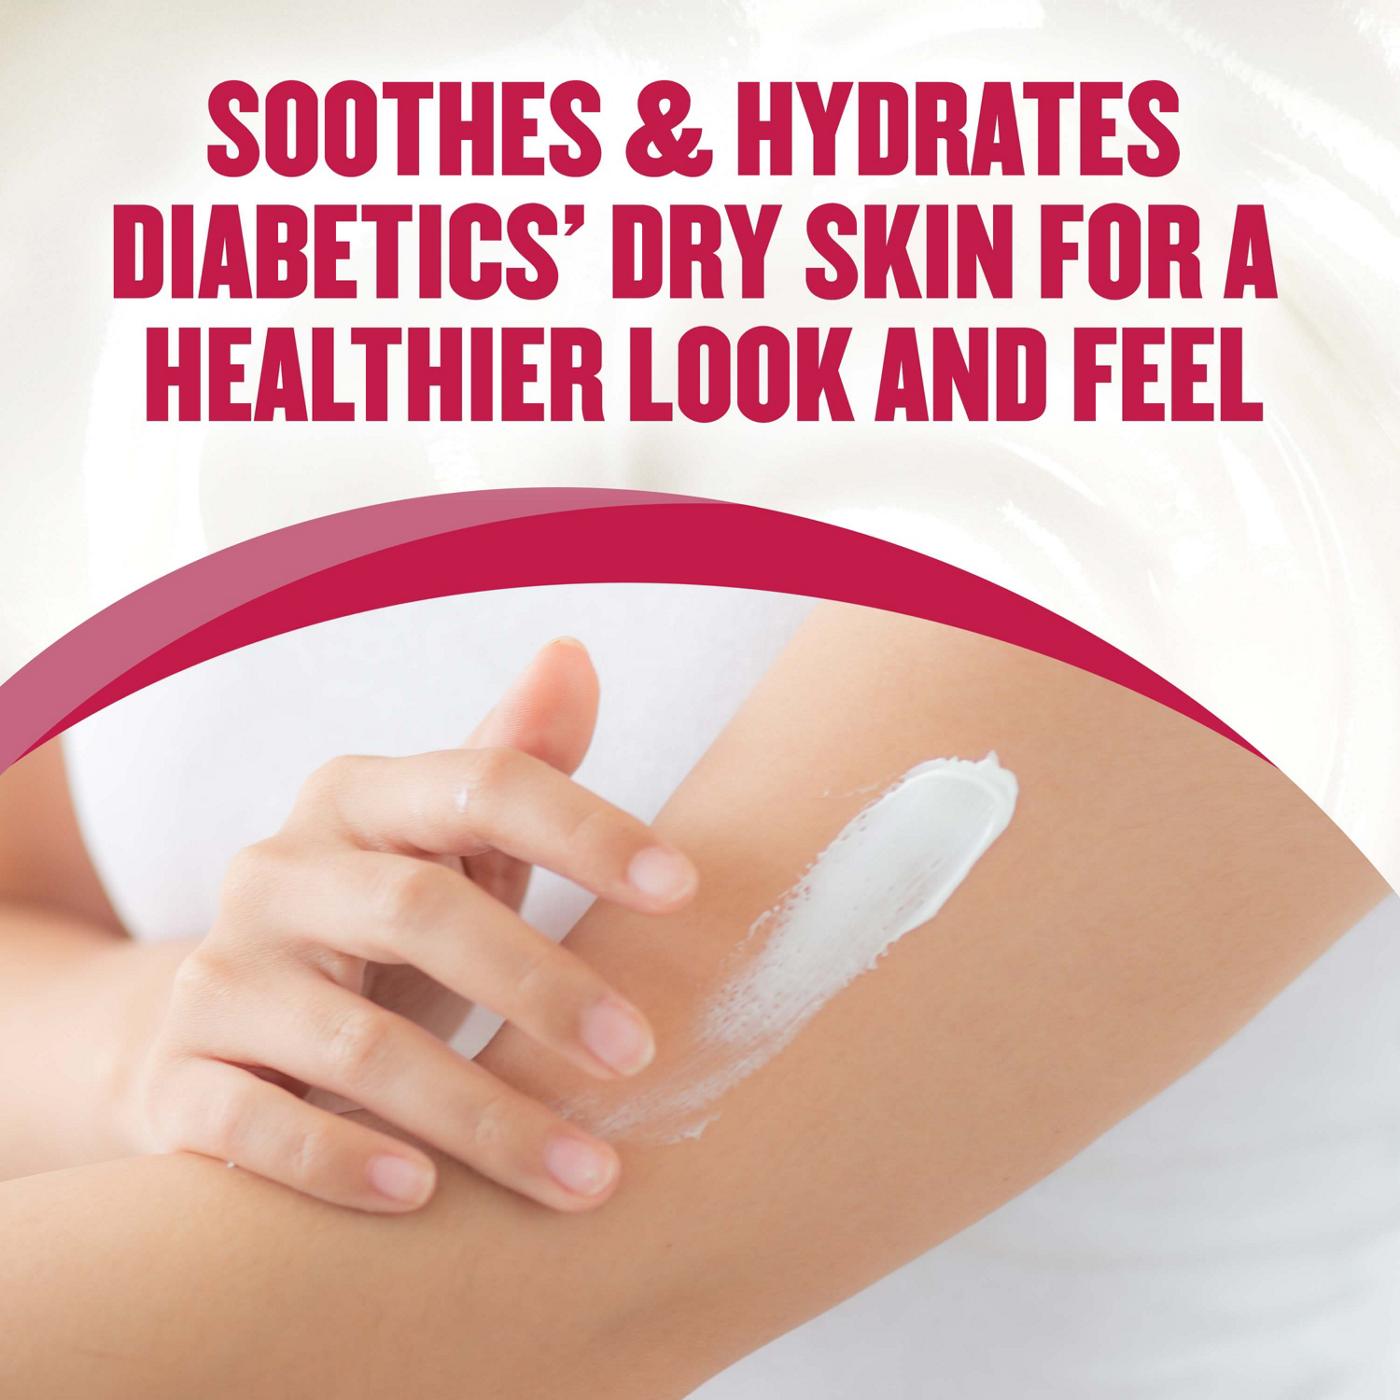 Gold Bond Diabetics' Dry Skin Relief Body Lotion With Aloe to Moisturize & Soothe; image 2 of 3